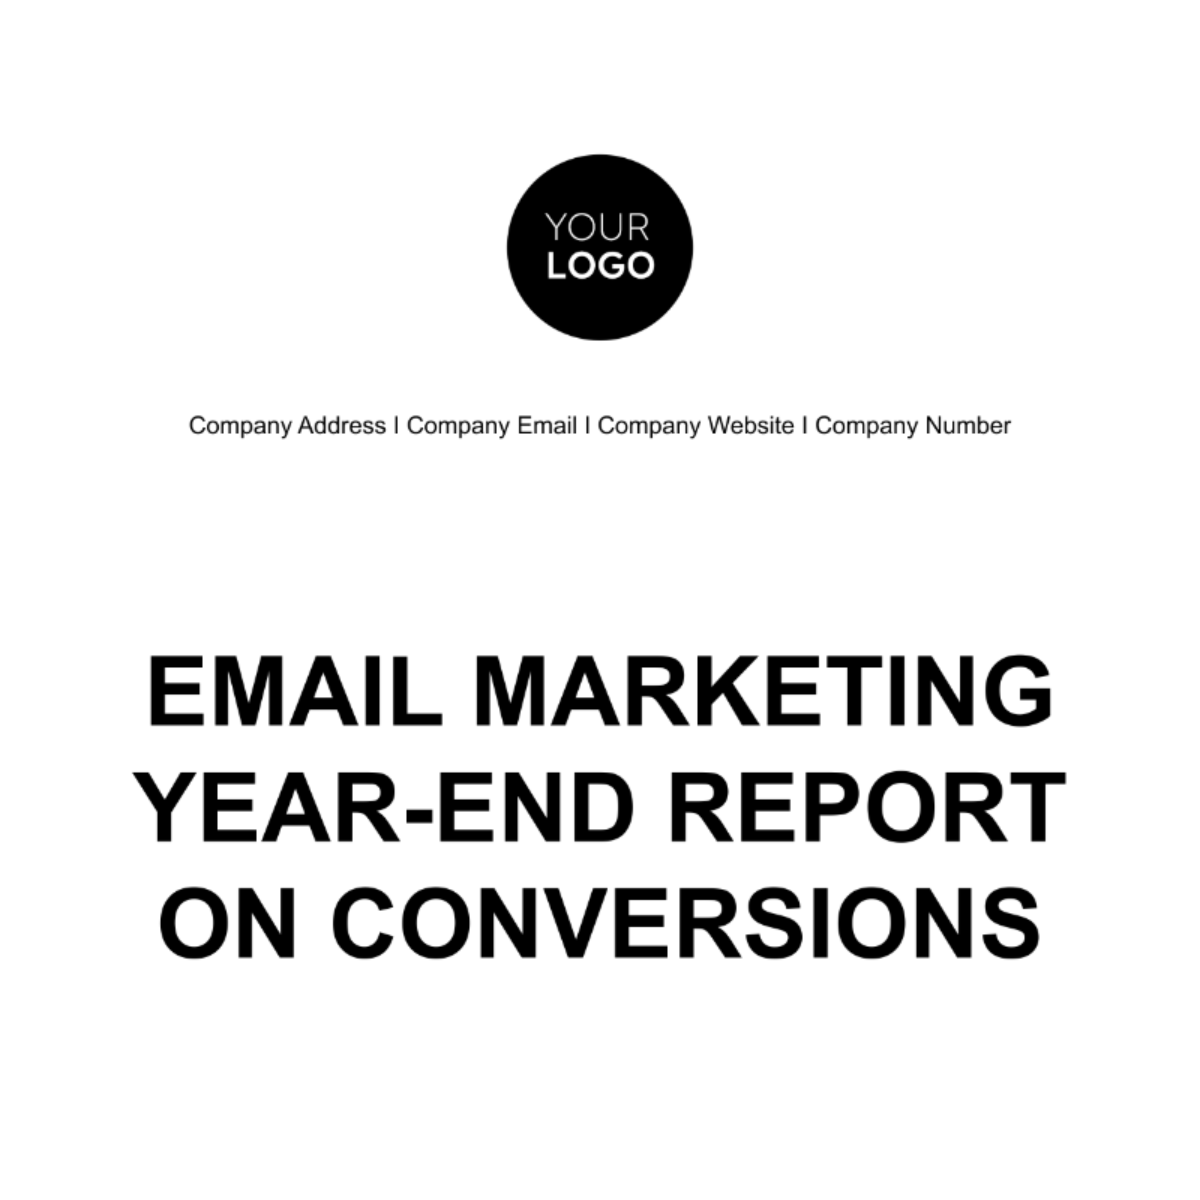 Free Email Marketing Year-end Report on Conversions Template